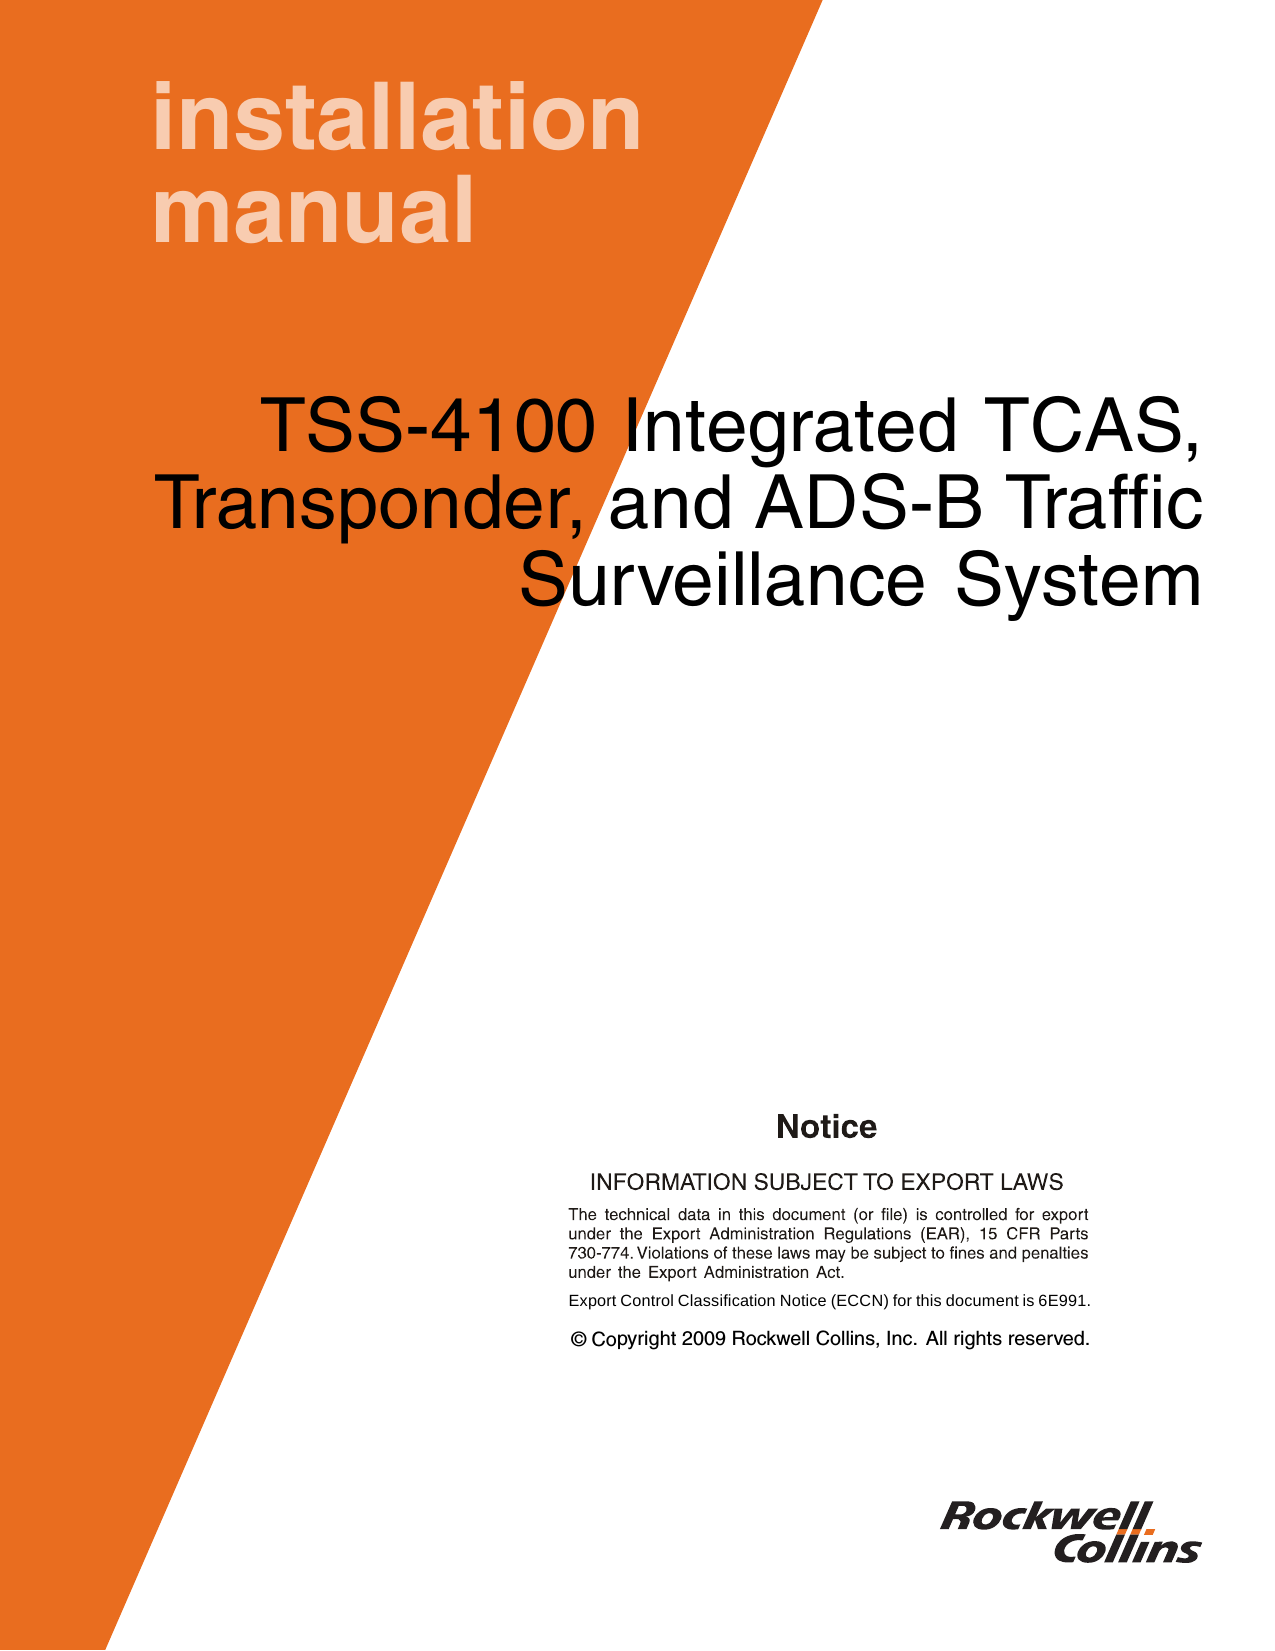 installationmanualTSS-4100 Integrated TCAS,Transponder, and ADS-B TrafficSurveillance SystemExport Control Classiﬁcation Notice (ECCN) for this document is 6E991.©Copyright 2009 Rockwell Collins, Inc. All rights reserved.